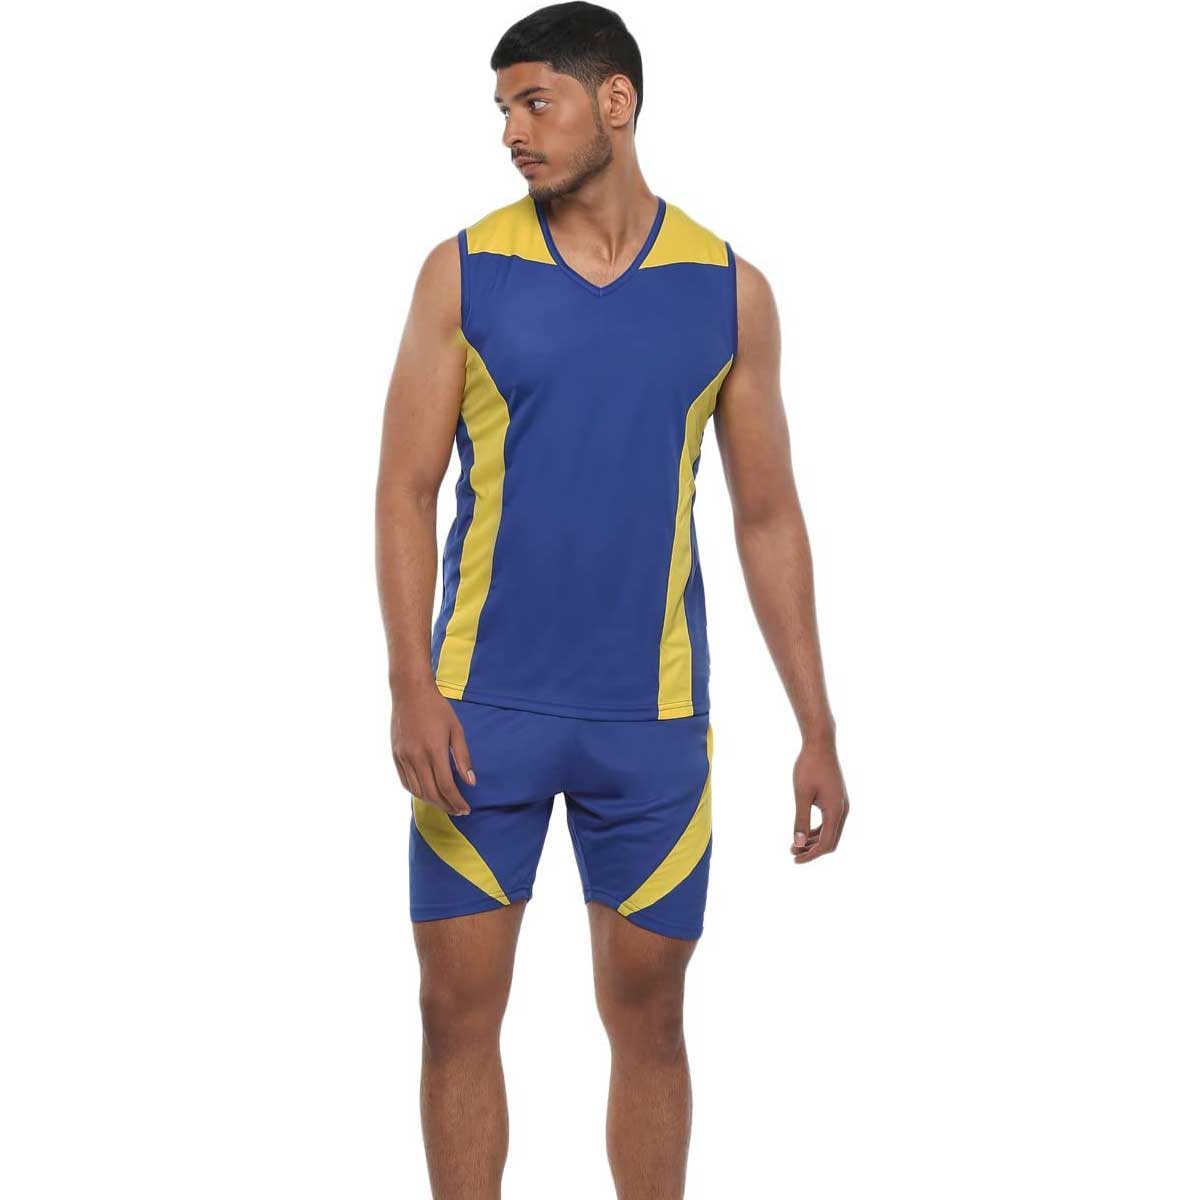 Cut and Sew Volleyball Jersey Manufacturers in Prokopyevsk